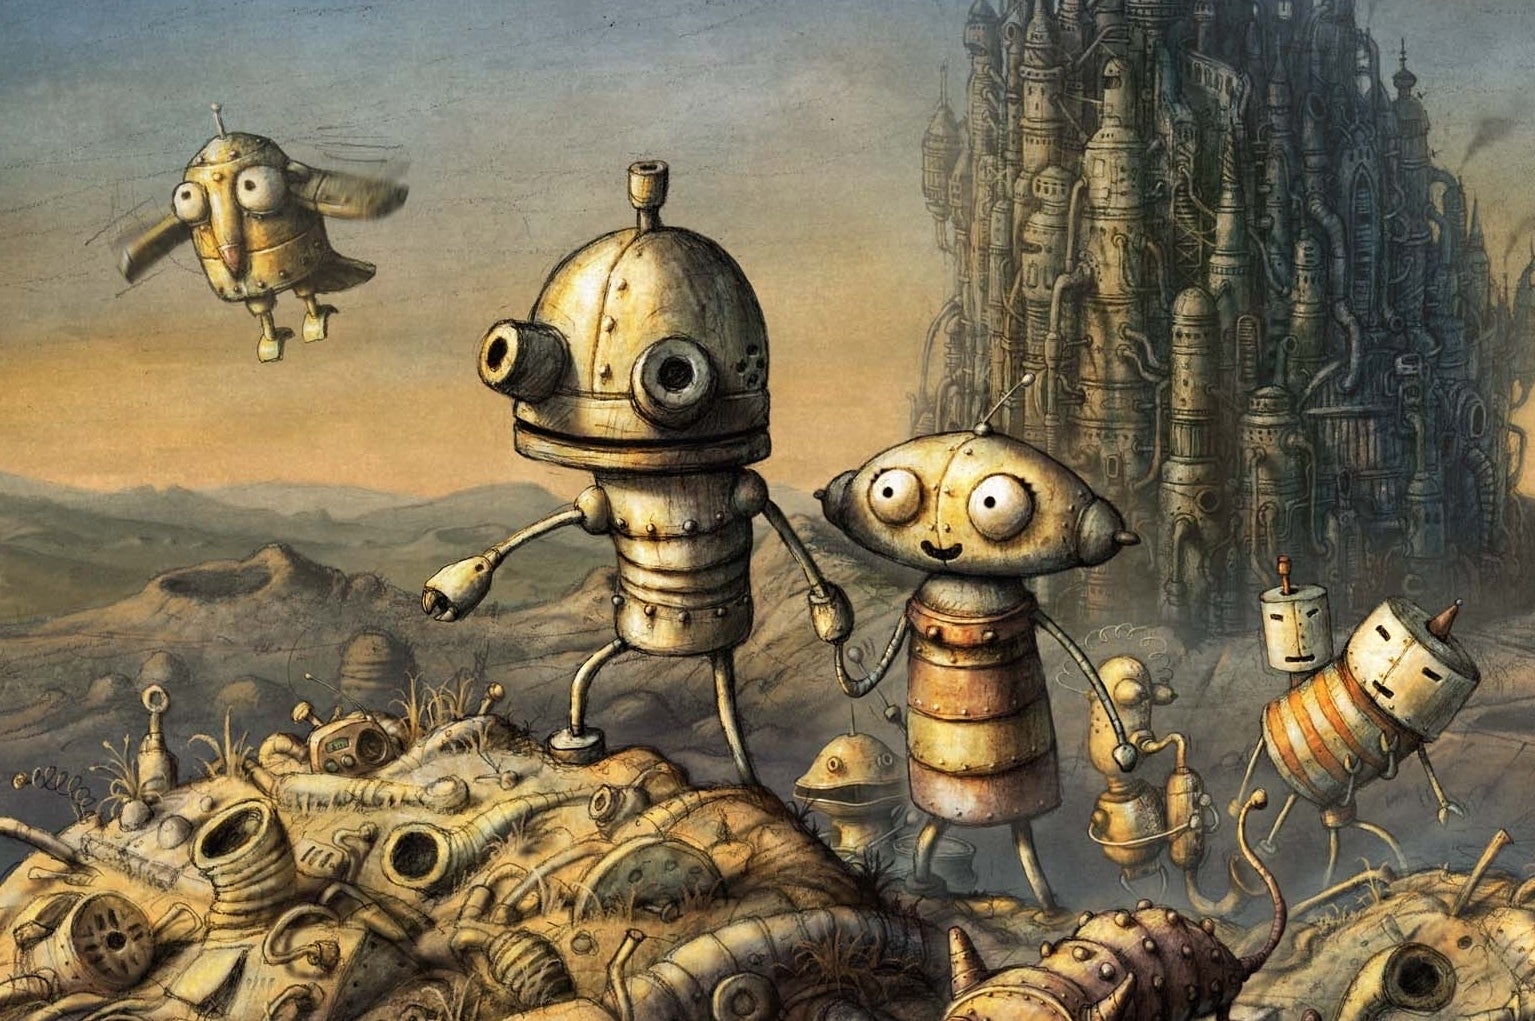 Image for Machinarium on Vita is set for release next week in Europe